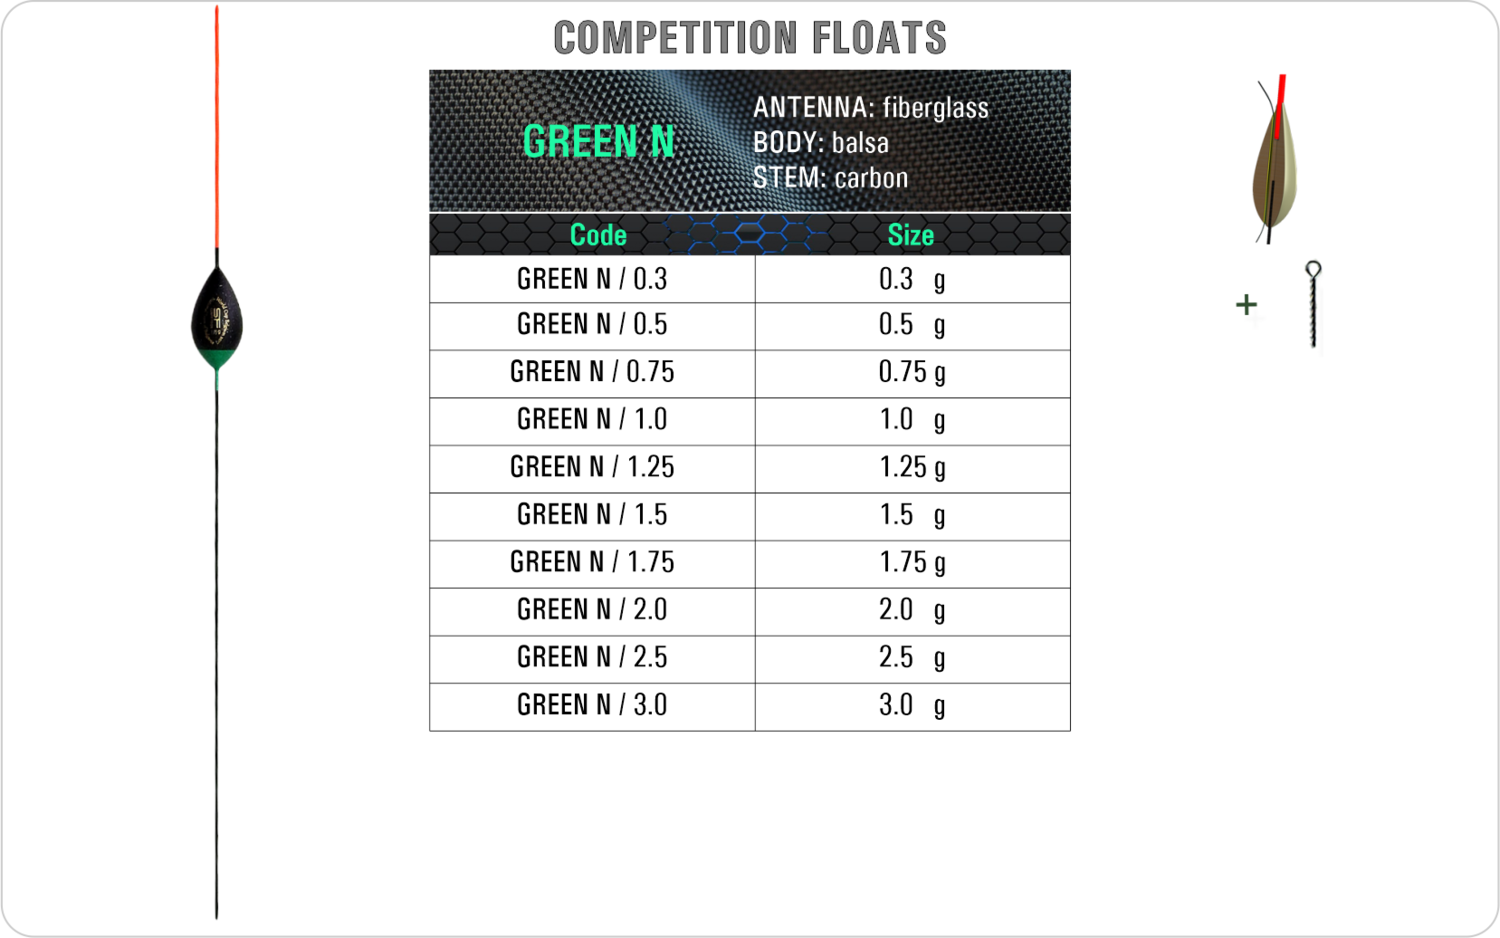 GREEN N Competition float model and table containing an additional information about this float with different codes, sizes, types of the body, the stem and the antenna of the float.